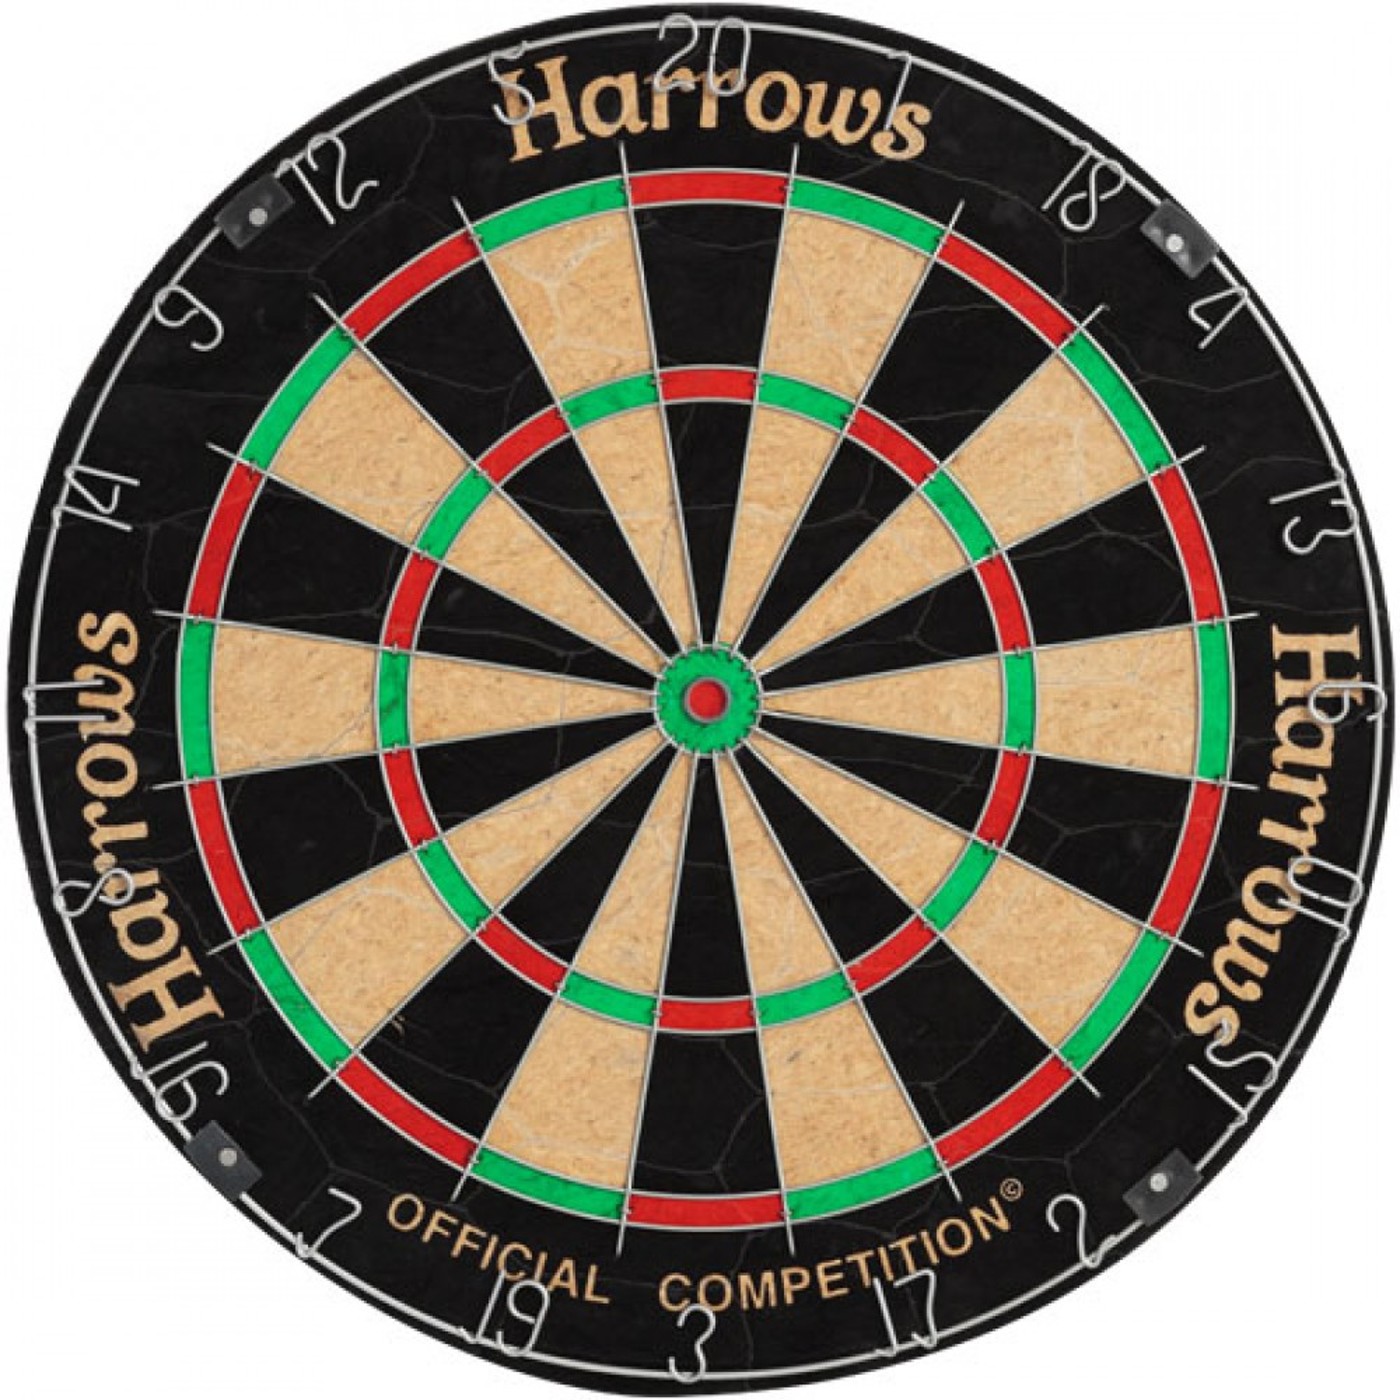 HARROWS Dartboard Official Competion